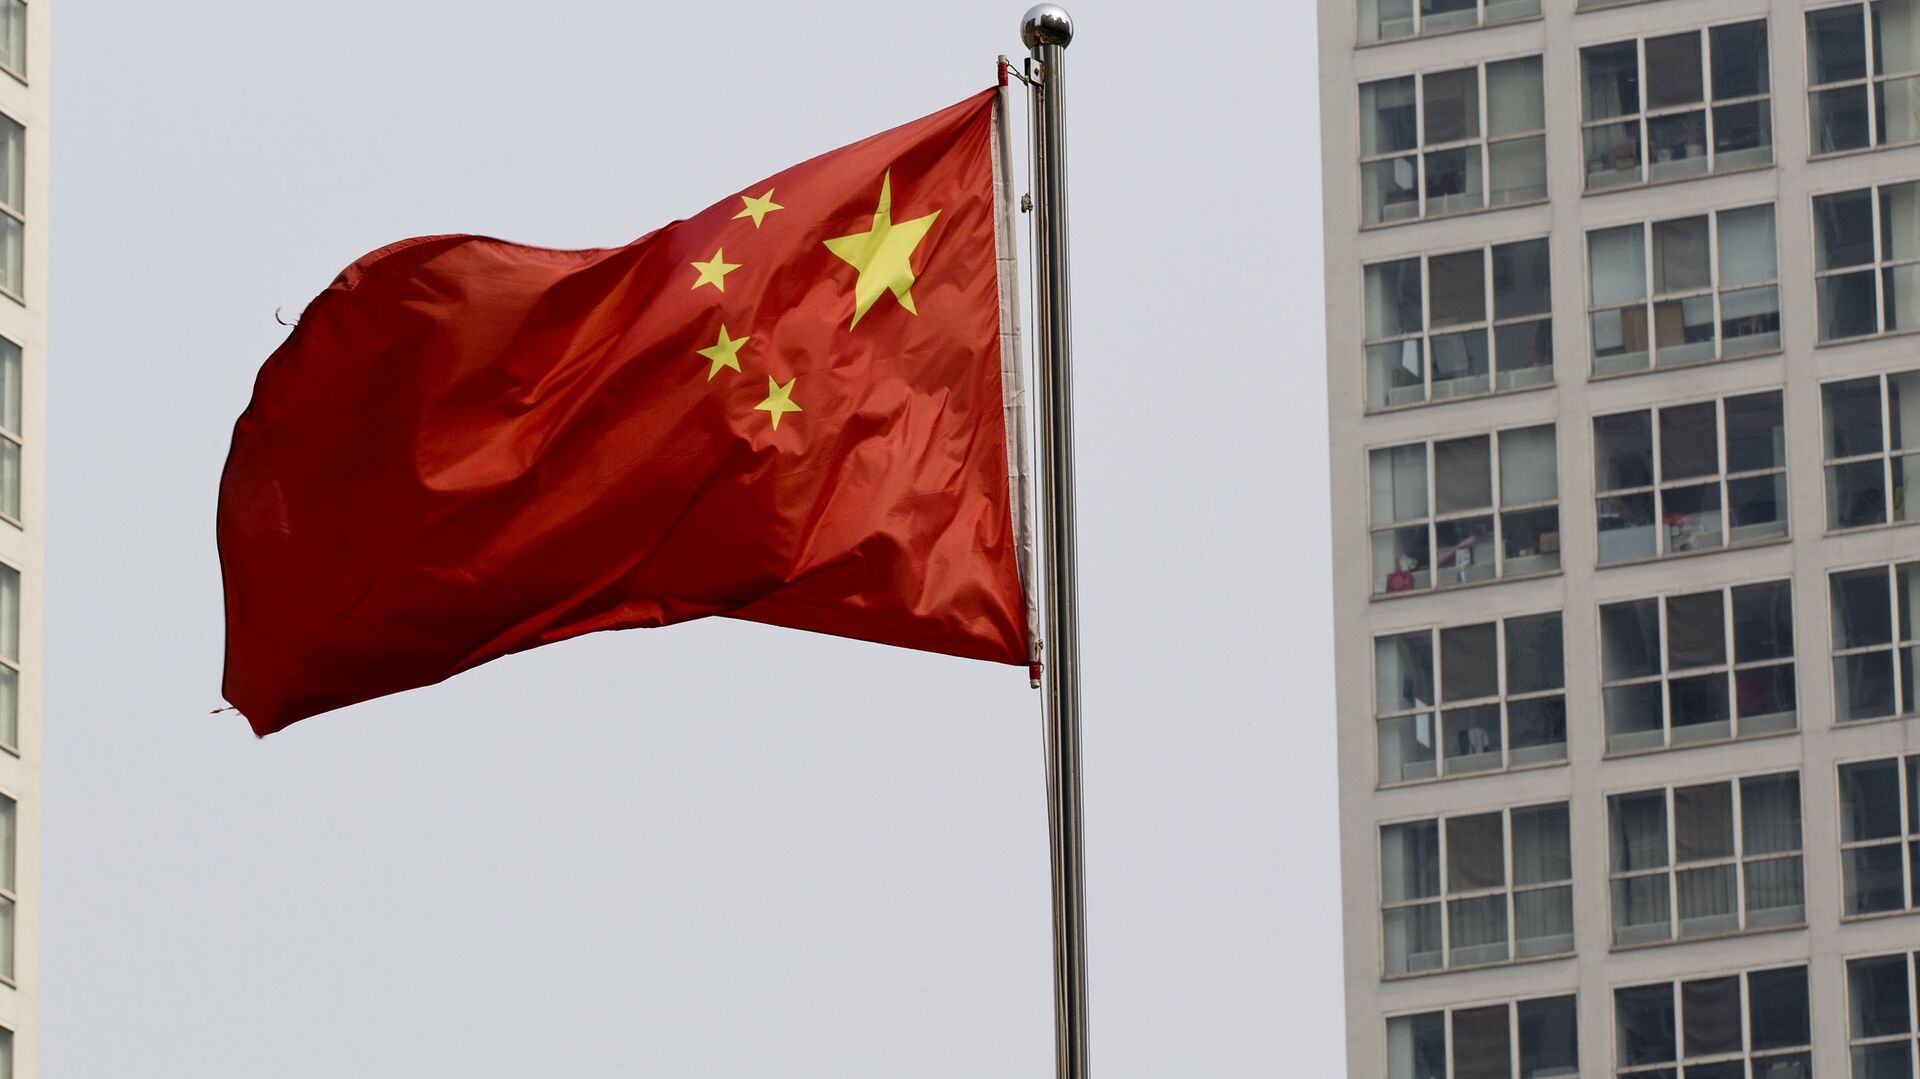 A Chinese national flag flutters in the wind in between a high-rise residential and office complex in Beijing, China. (File) - Sputnik Moldova-România, 1920, 22.04.2022